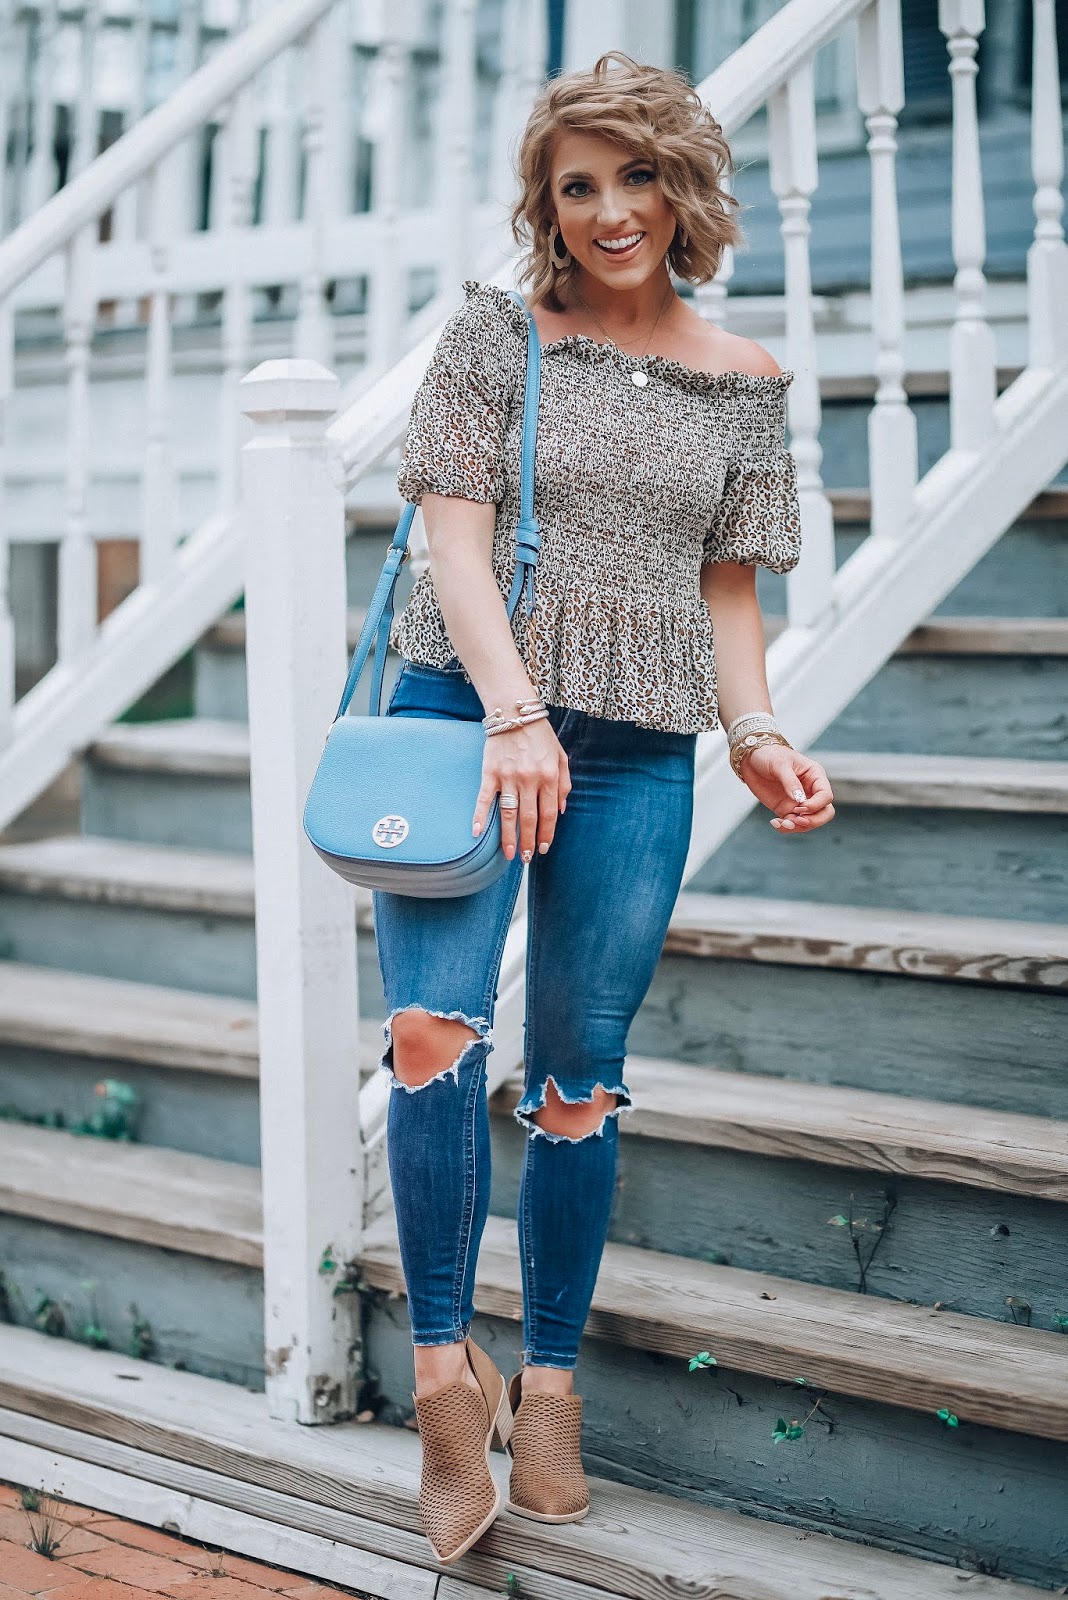 Leopard Lovin' - Under $50 Smocked Leopard Peplum Top, Busted Knee Jeans, Perforated Booties - Pre-Fall Style - Something Delightful Blog